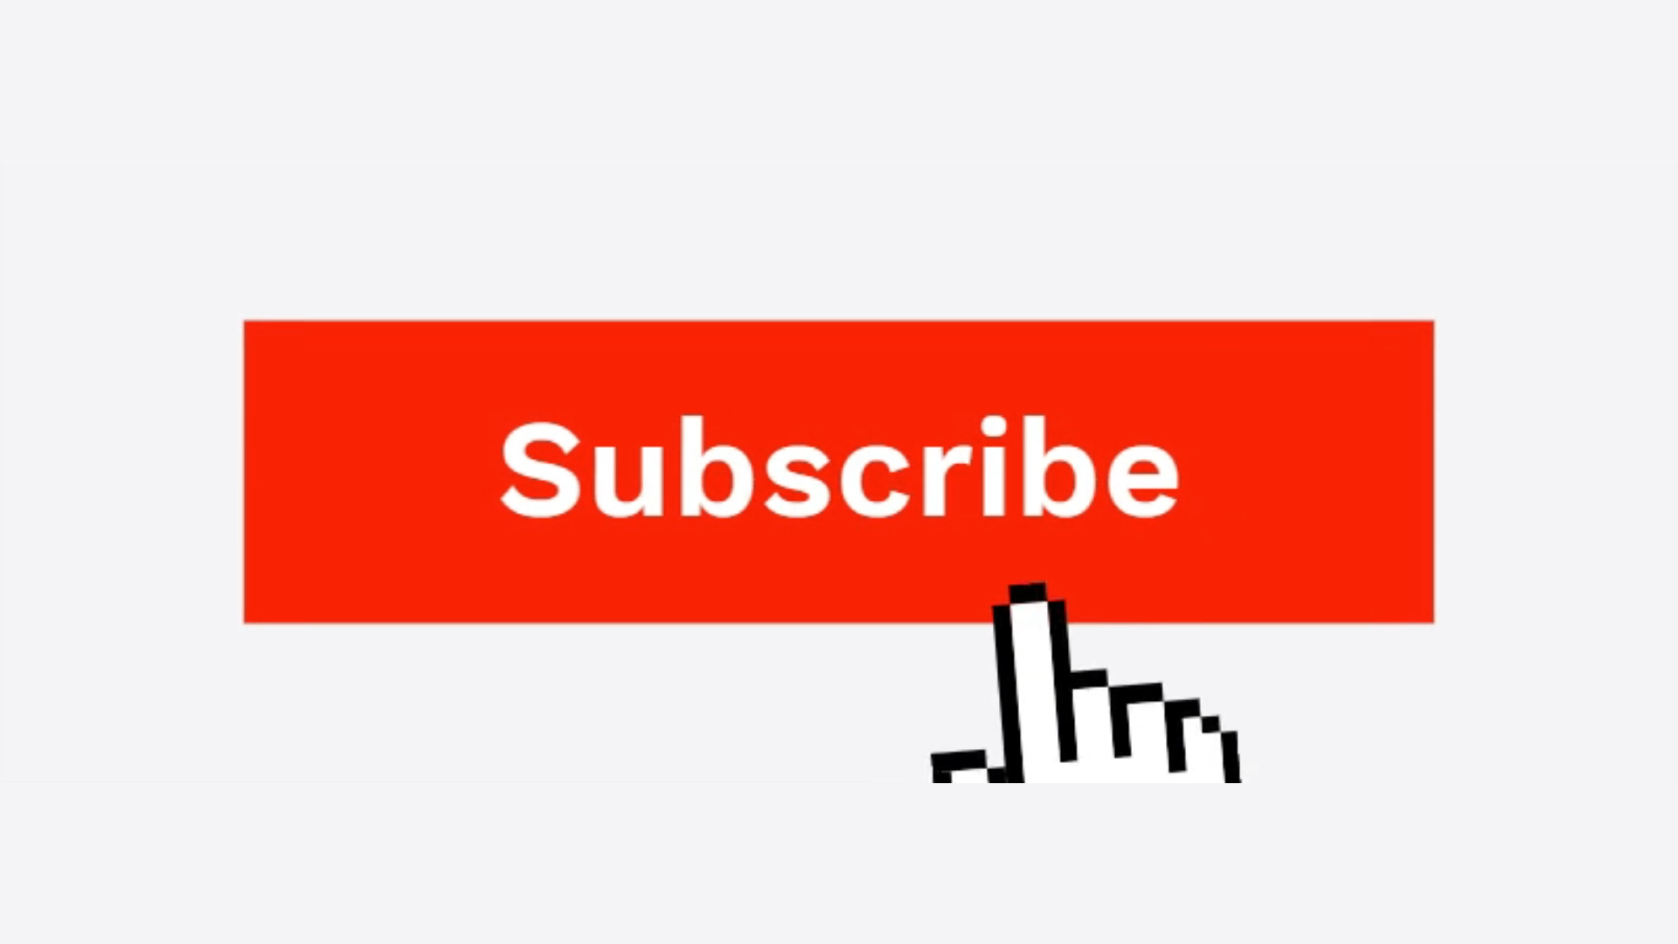 Animated Subscribe Button For Live Streams - Chris Hernandez's Ko-fi Shop -  Ko-fi ❤️ Where creators get support from fans through donations,  memberships, shop sales and more! The original 'Buy Me a